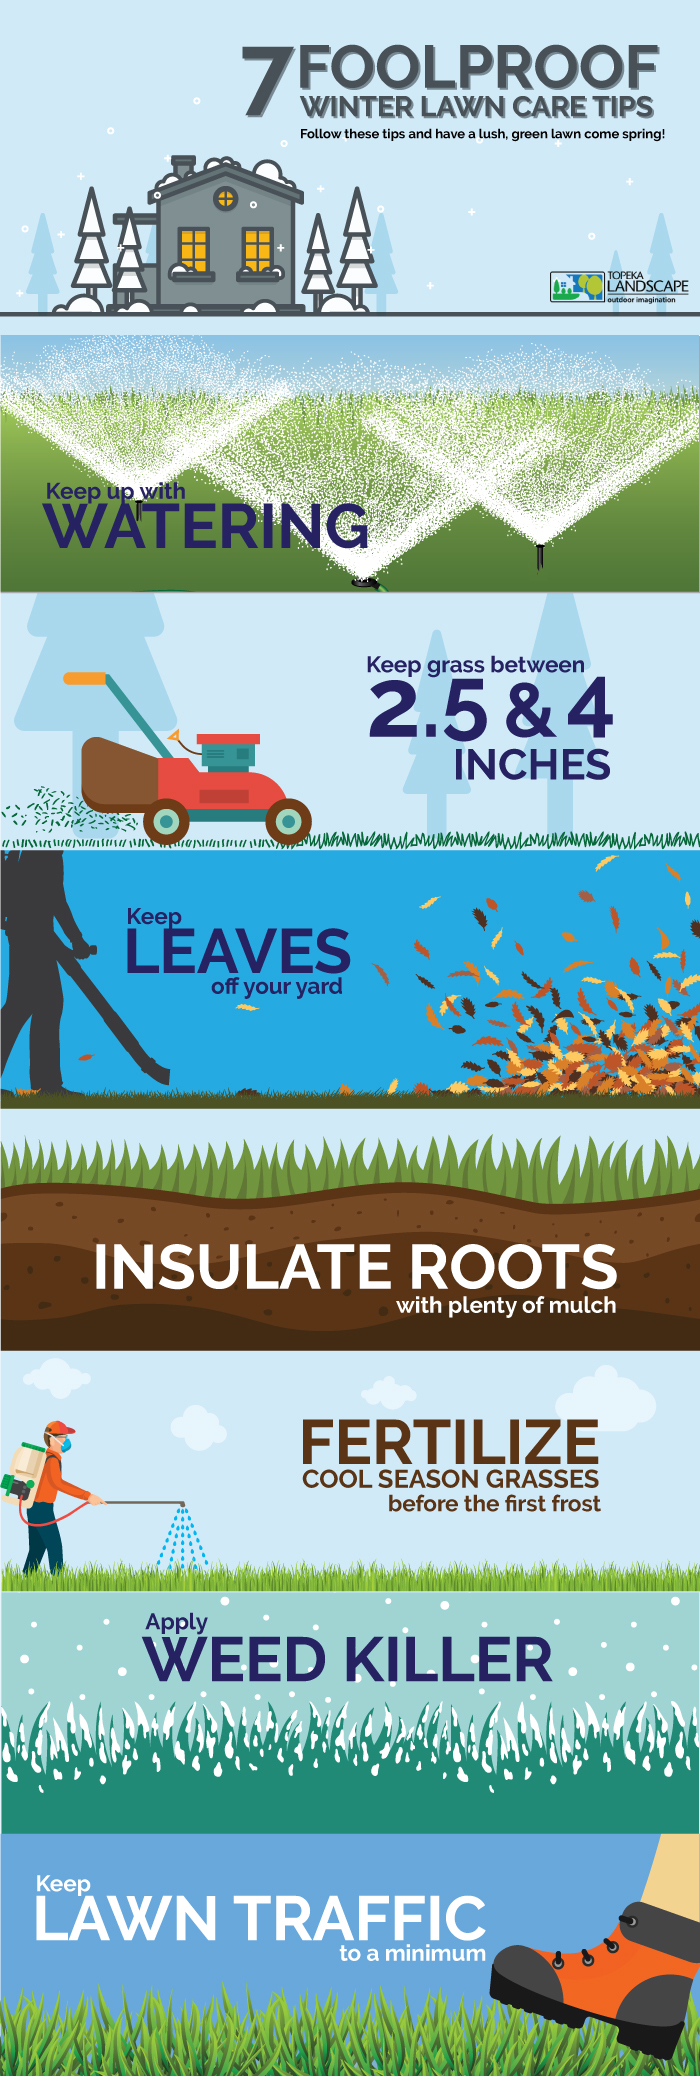 Lawn Care Products and Maintenance — Lawn Tips!